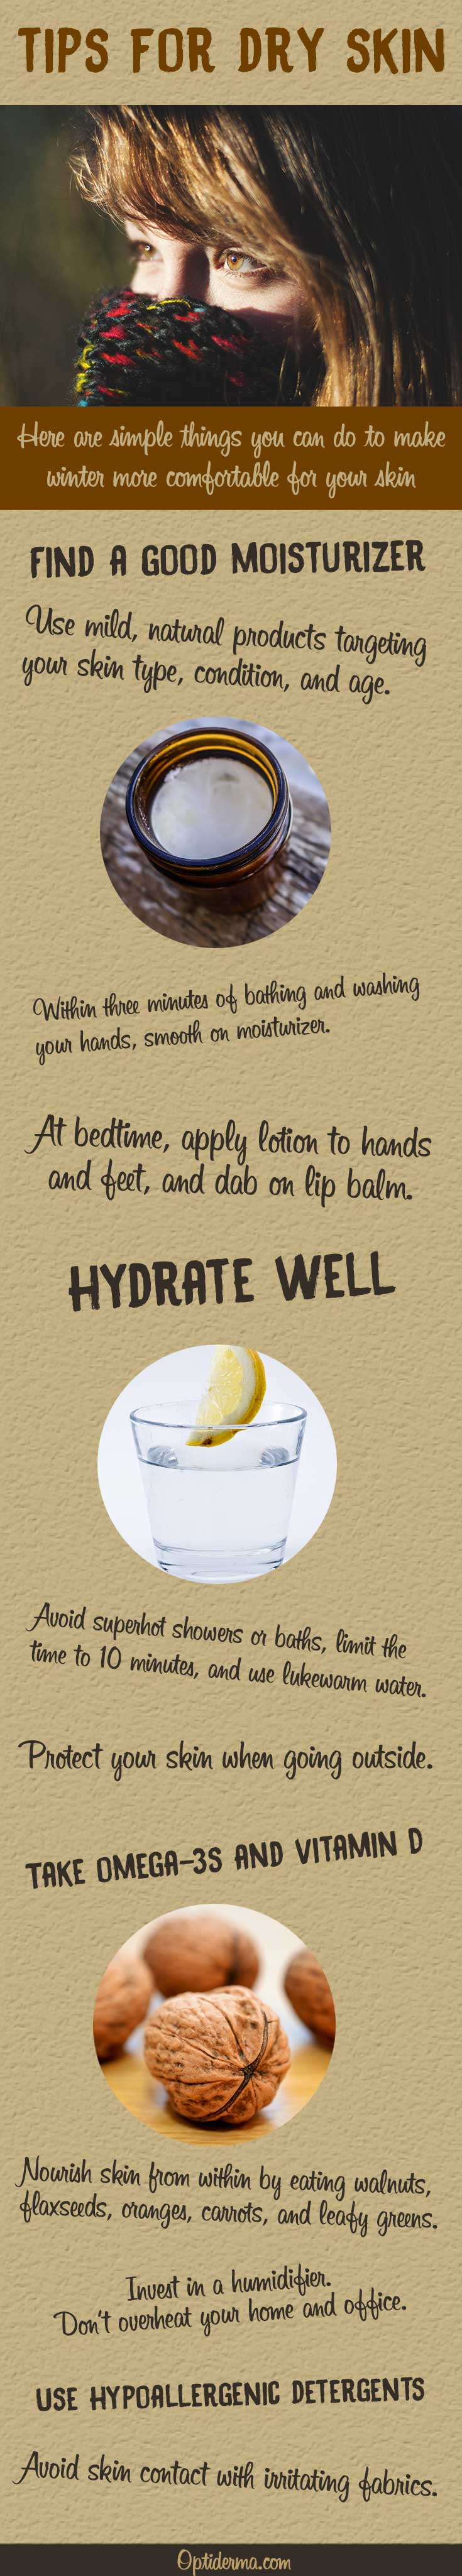 Tips to Relieve Dry Skin in Winter - Infographic